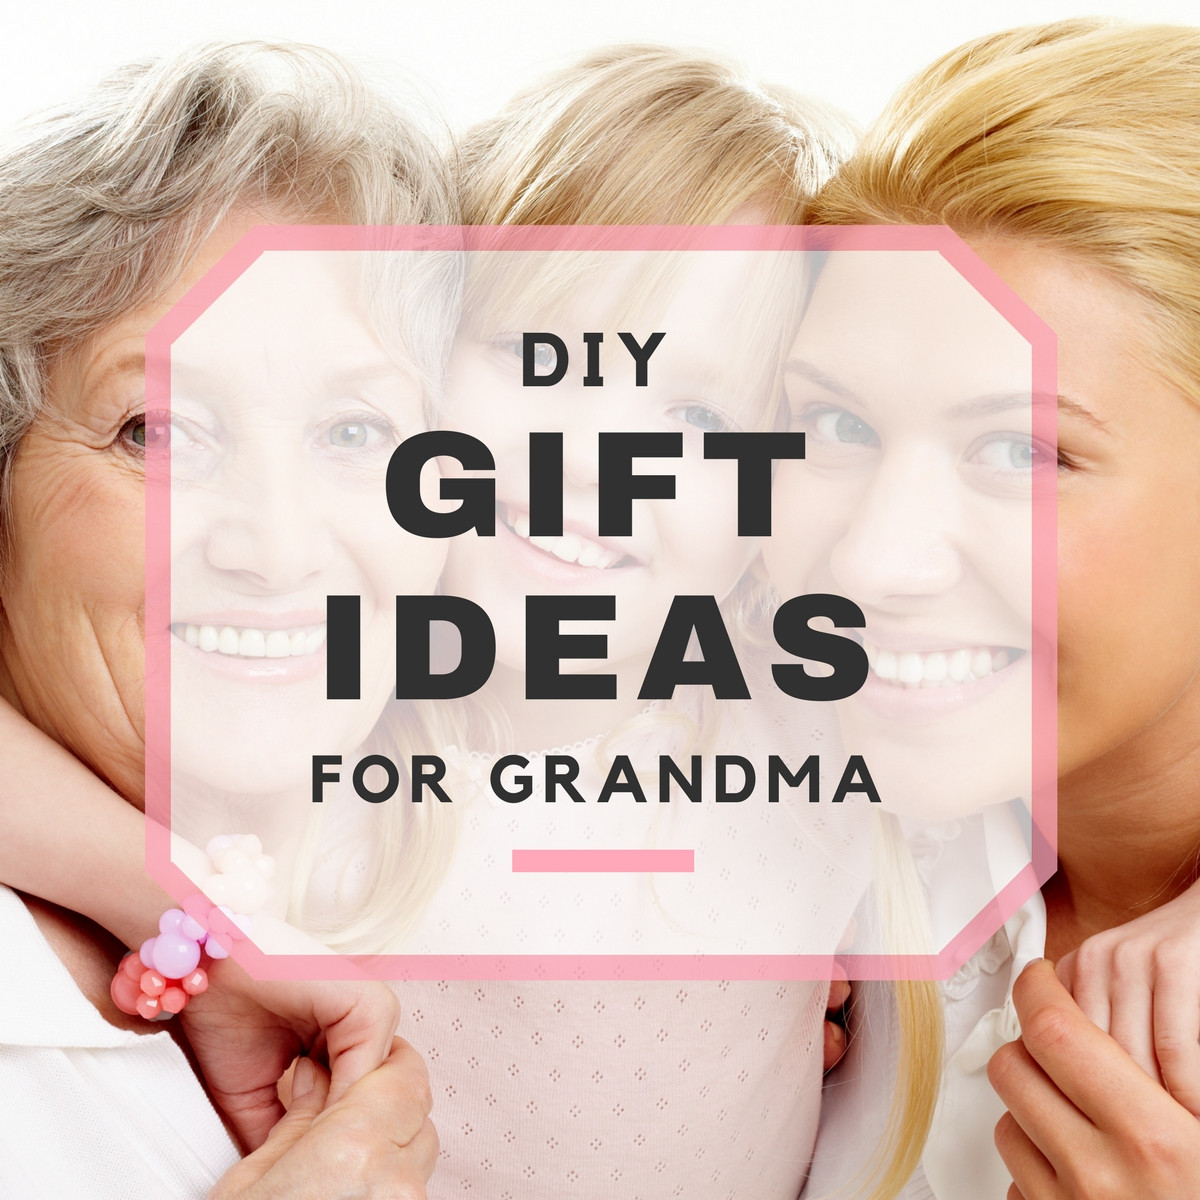 Gift Ideas For Grandmothers
 DIY Gift Ideas for Grandma